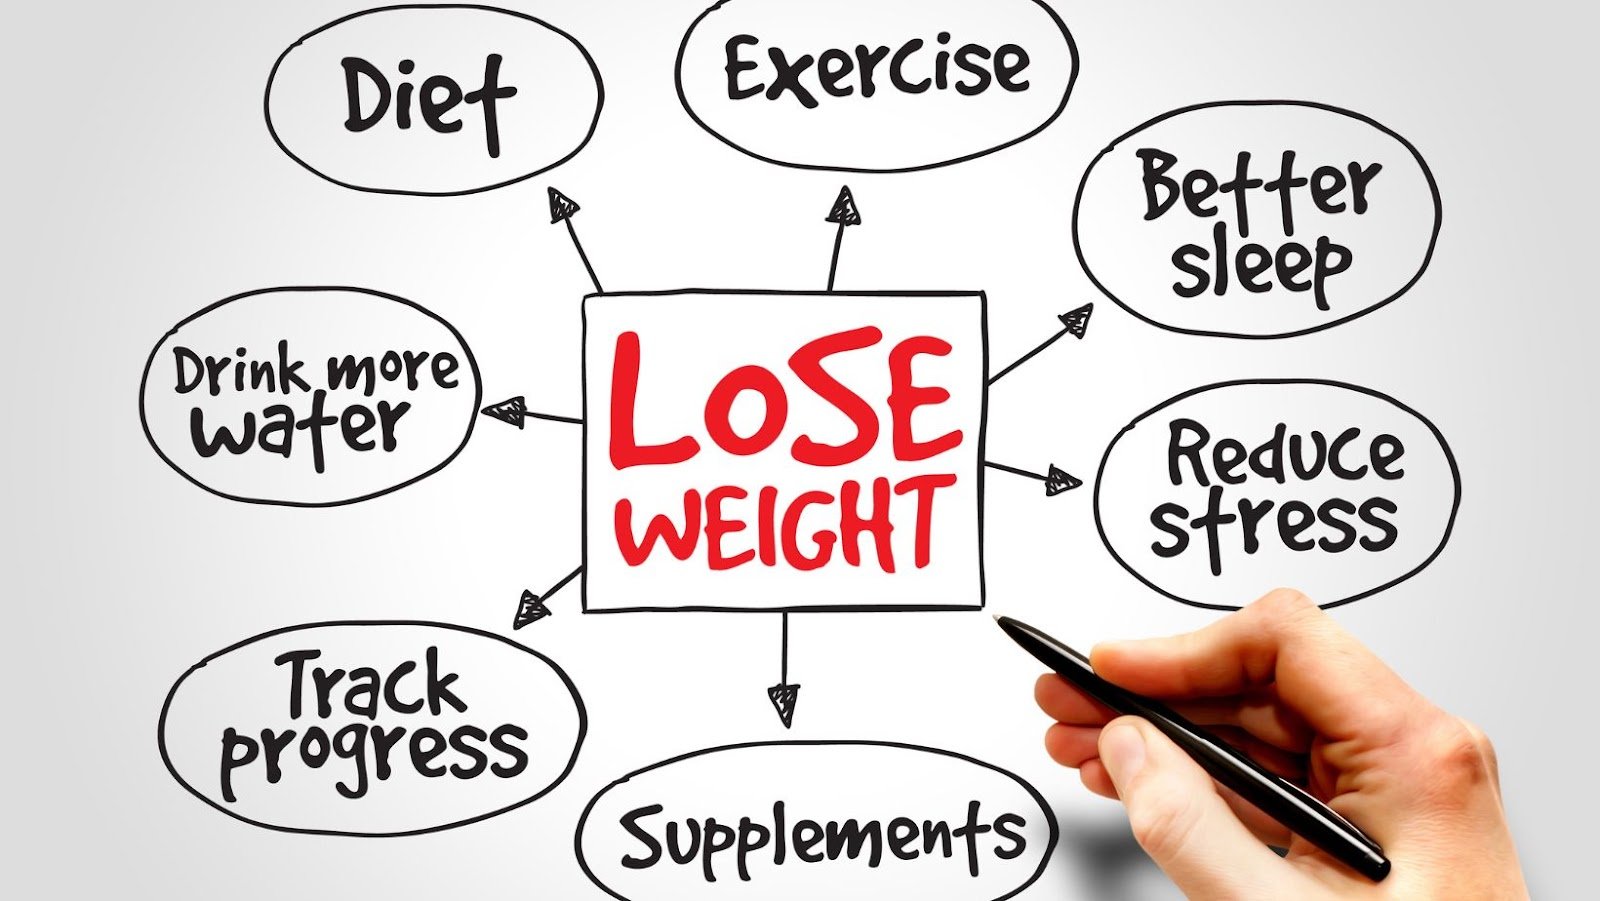 [5 Healthy and Effective Ways to Lose Weight]